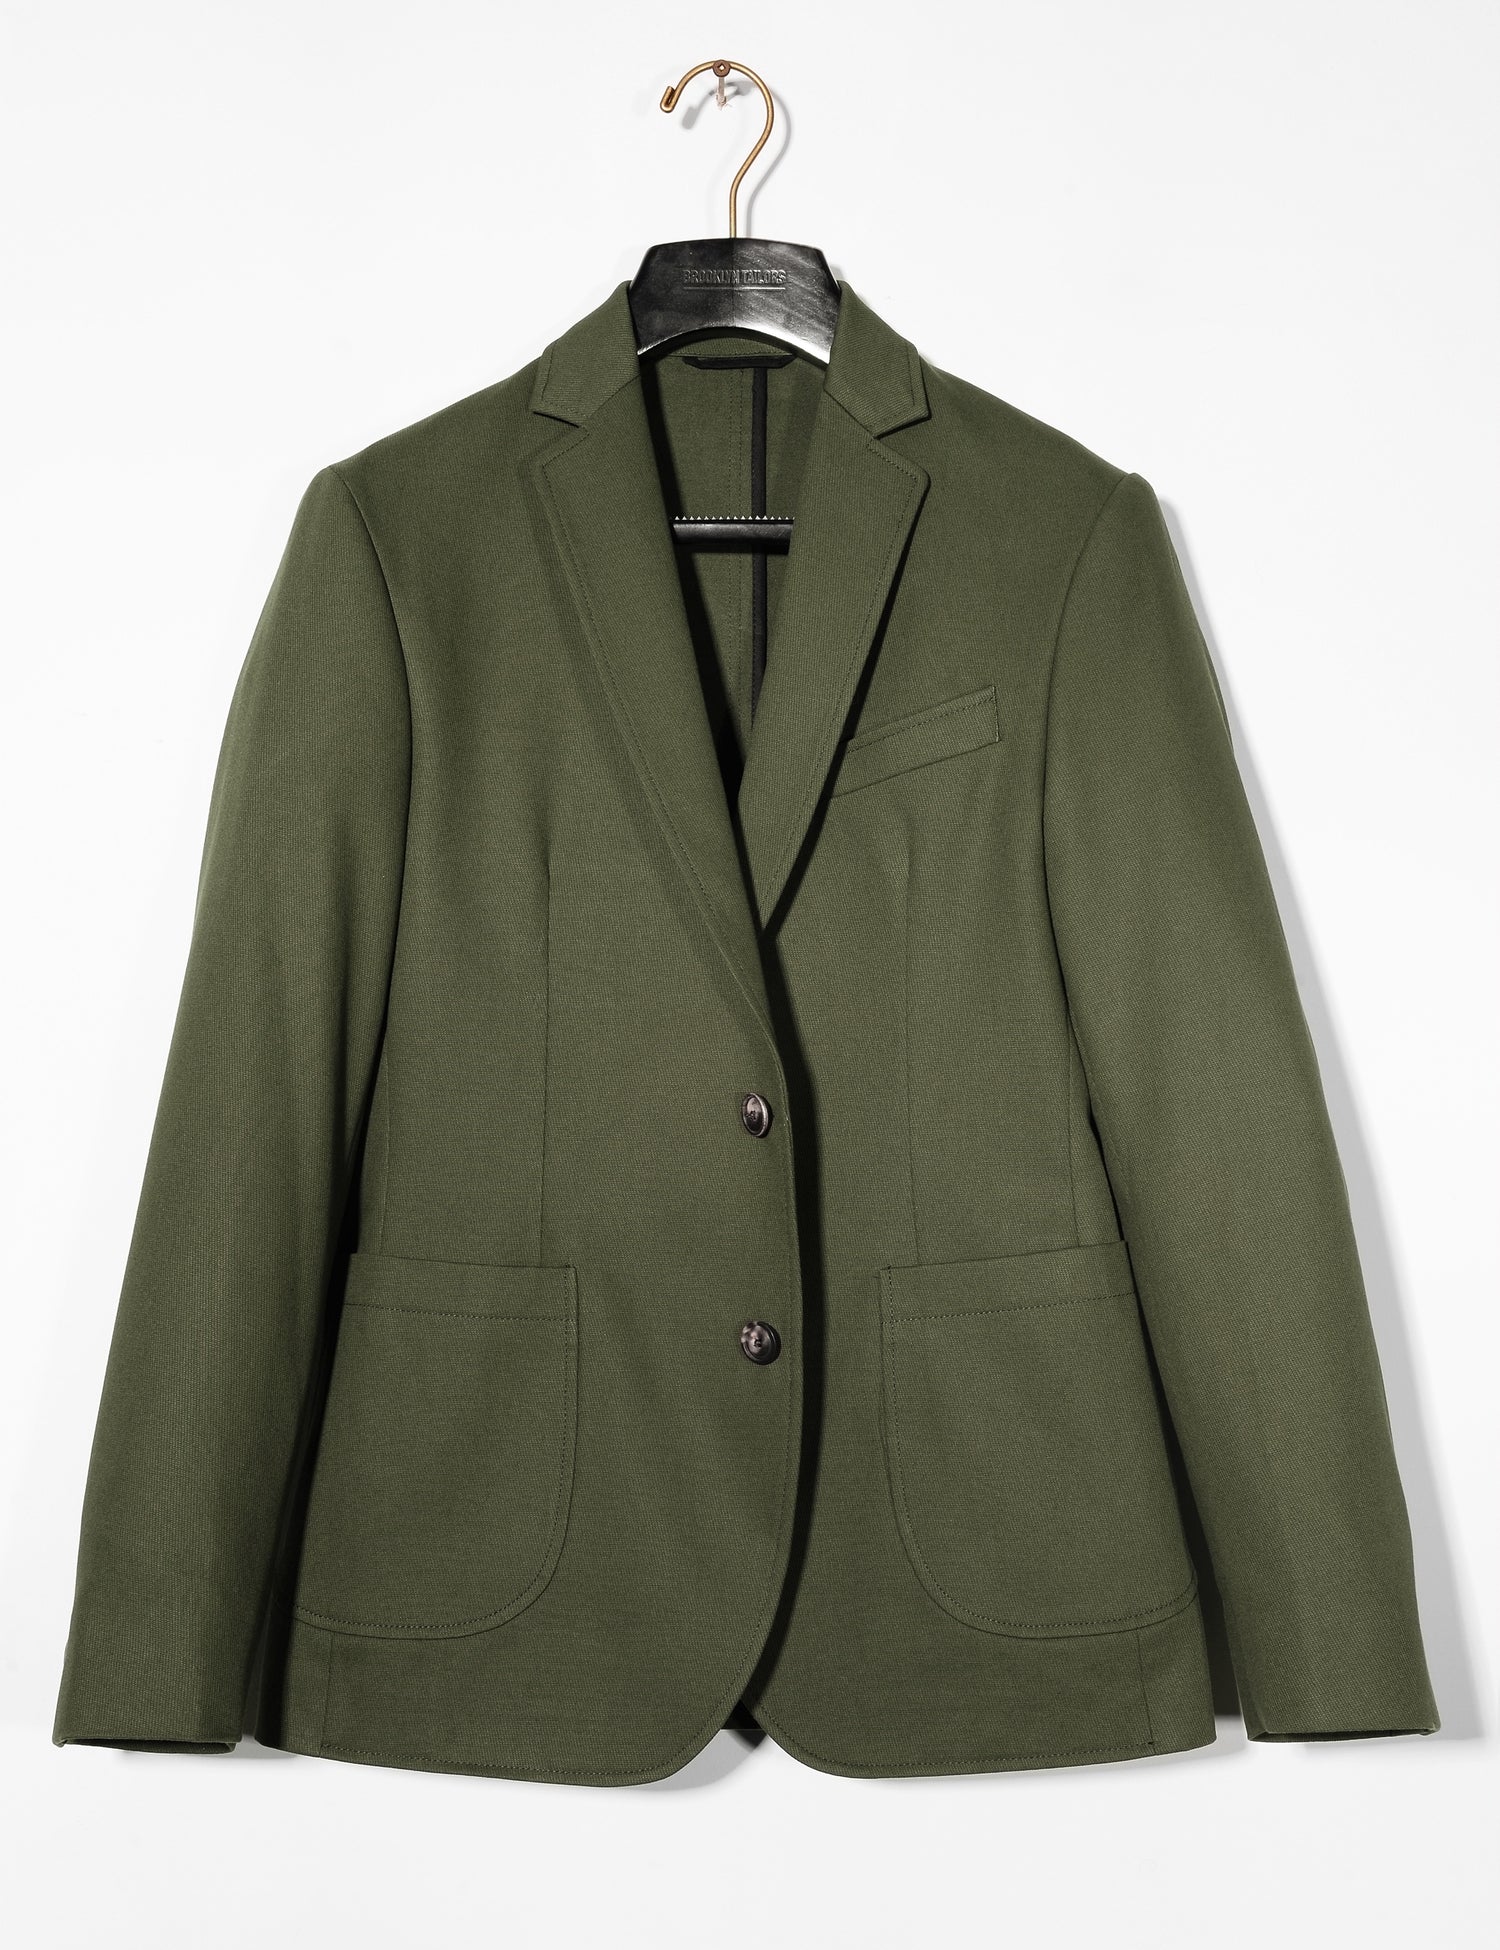 Brooklyn Tailors BKT35 Unstructured Jacket in Cavalry Twill - Olive full length shot on hanger